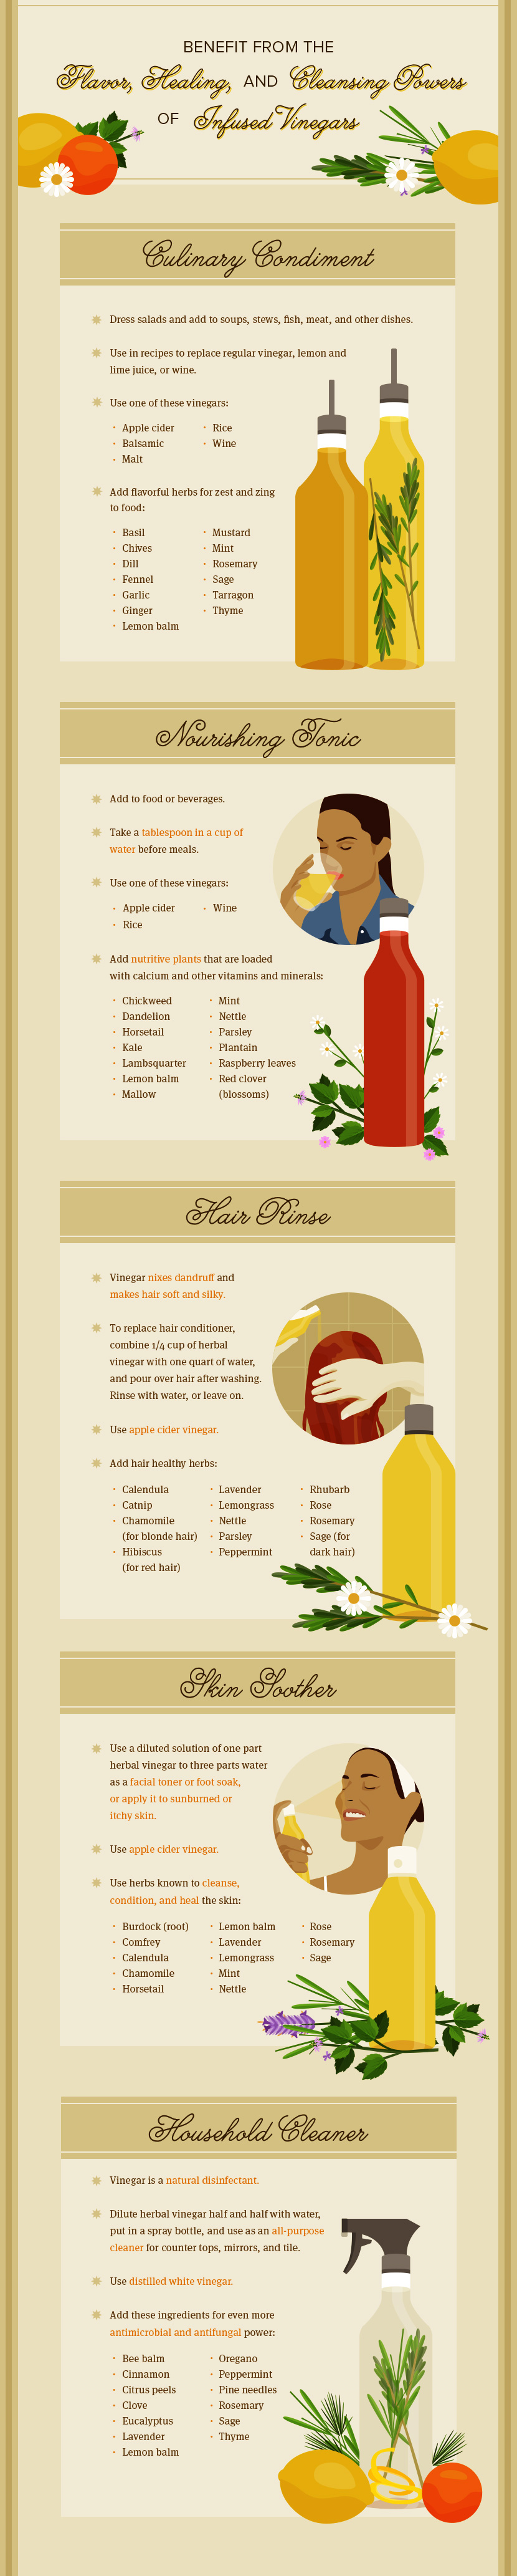 Herb Infused Vinegar: How They Benefit and Heal